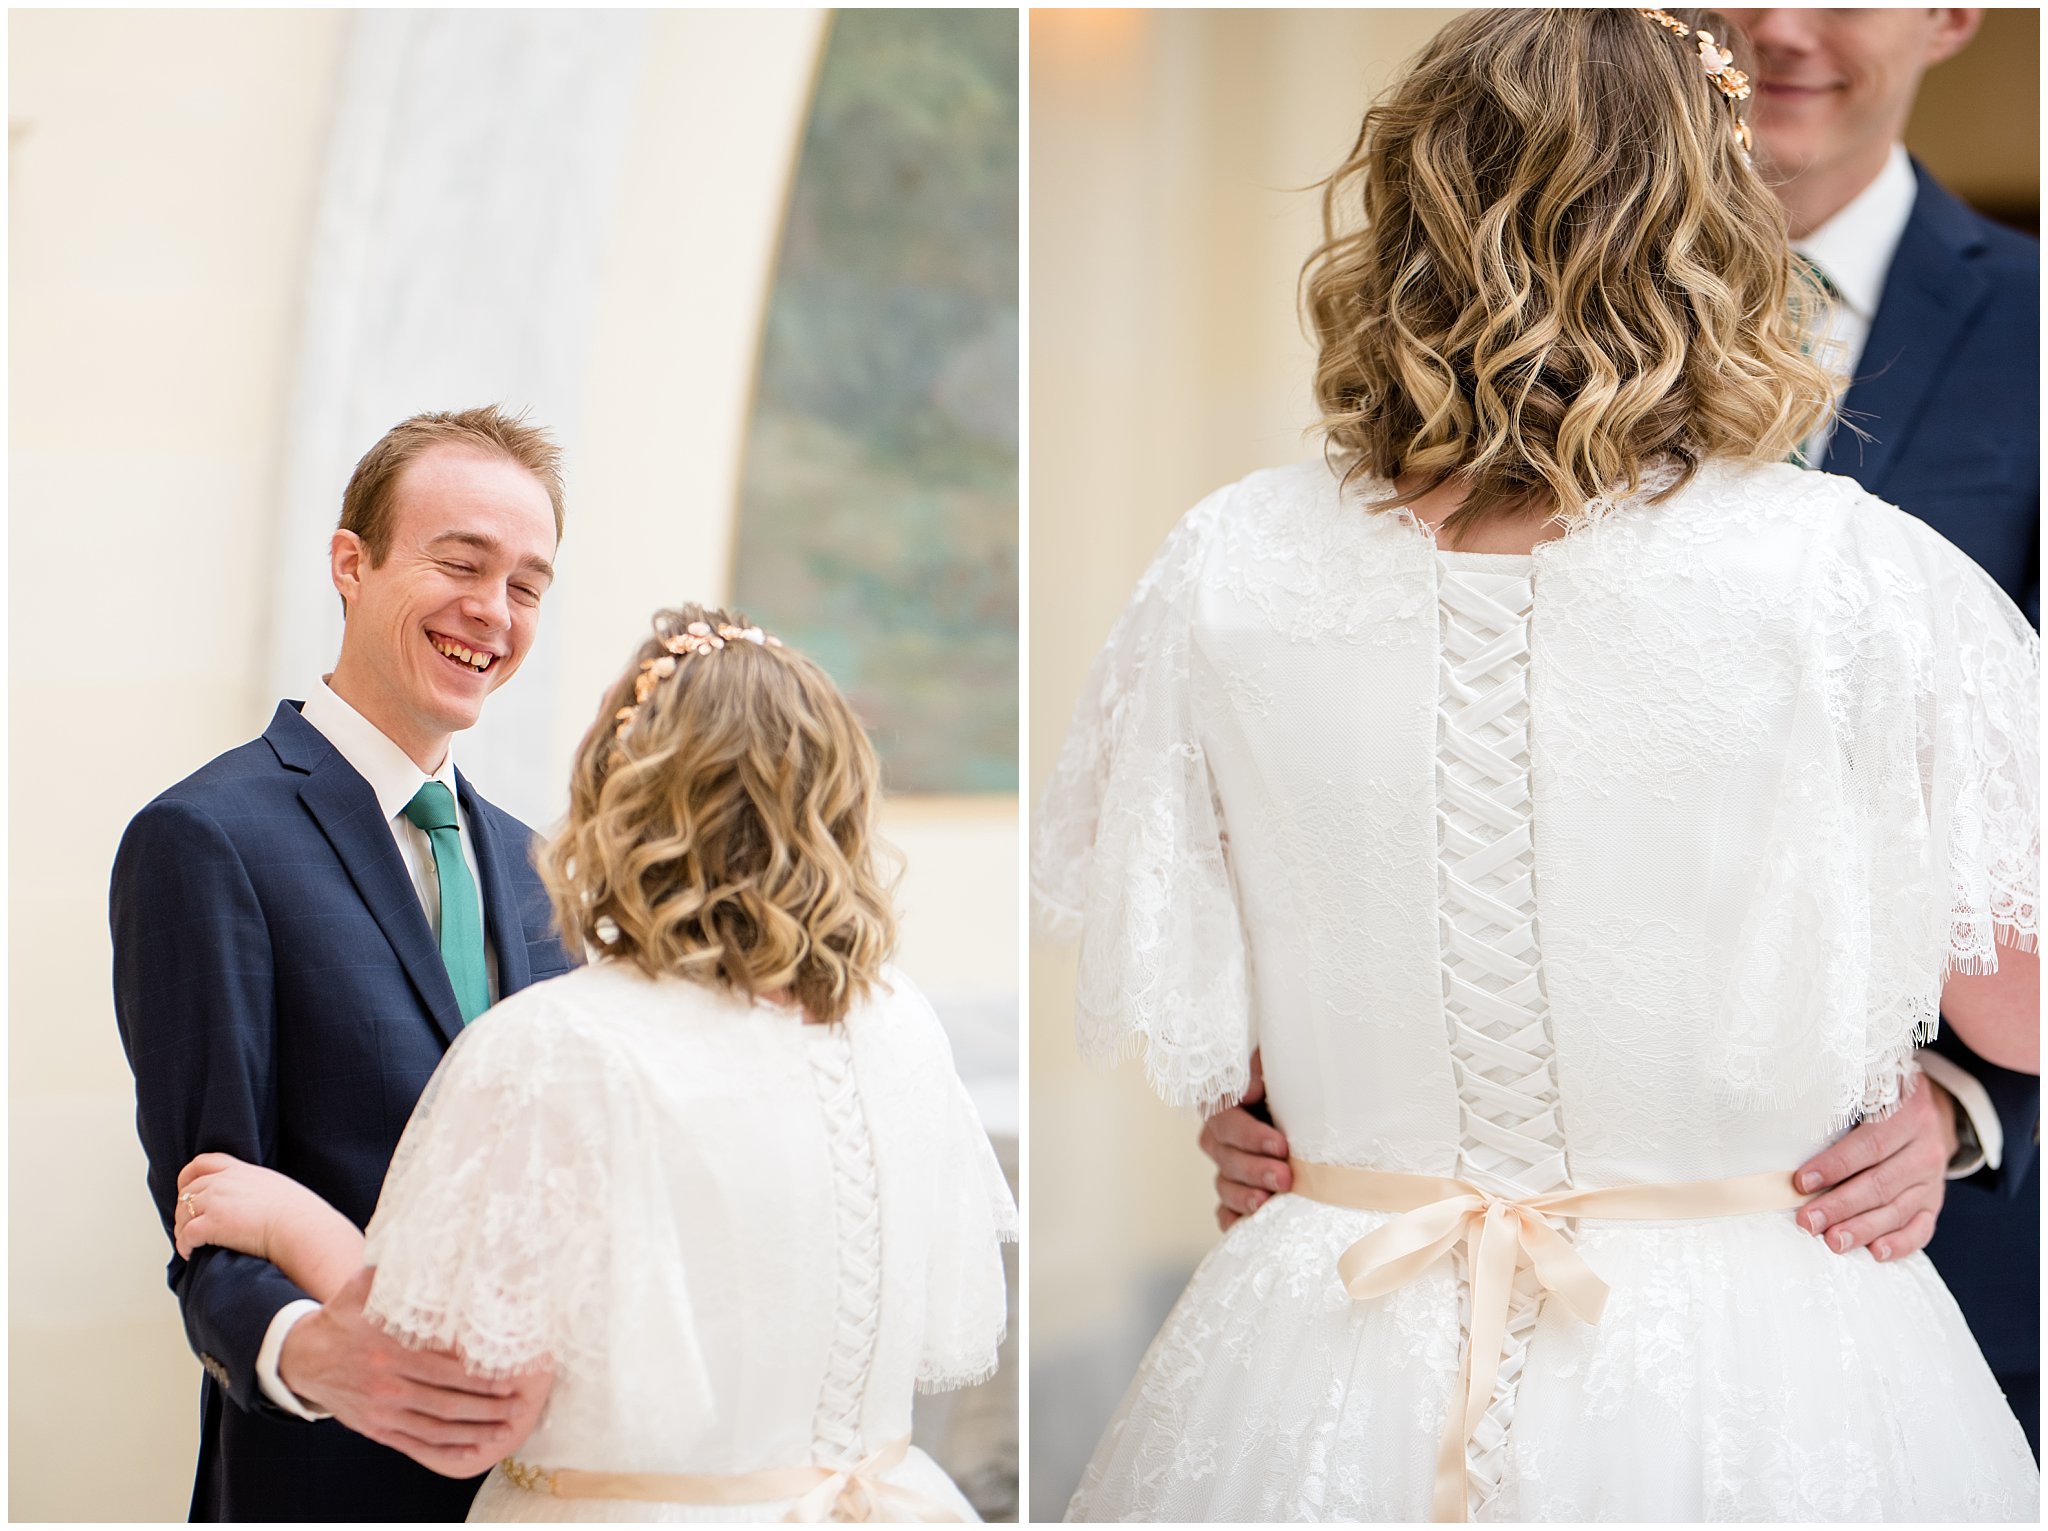 Bride and groom first look inside capitol building | Winter Formals at the Utah State Capitol | Utah Wedding Photography